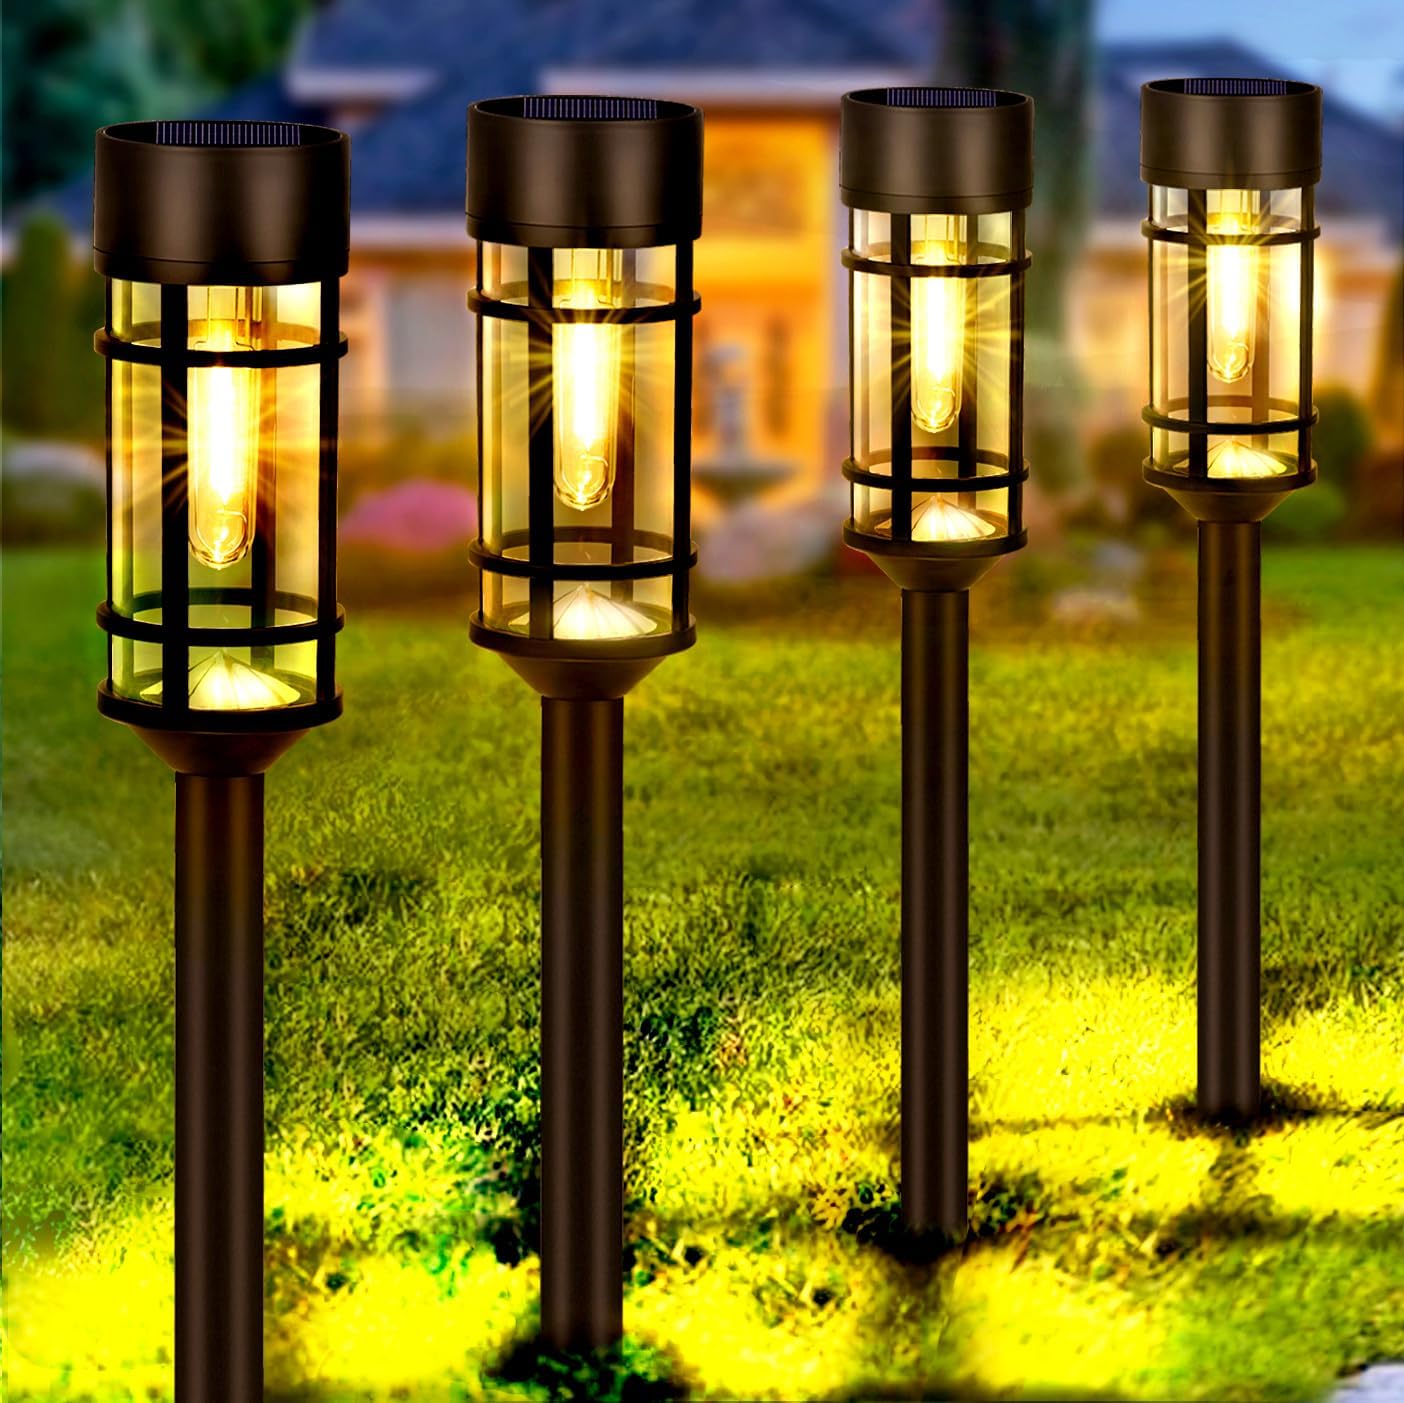 Mancra 8 Pack Glass Solar Pathway Lights Review